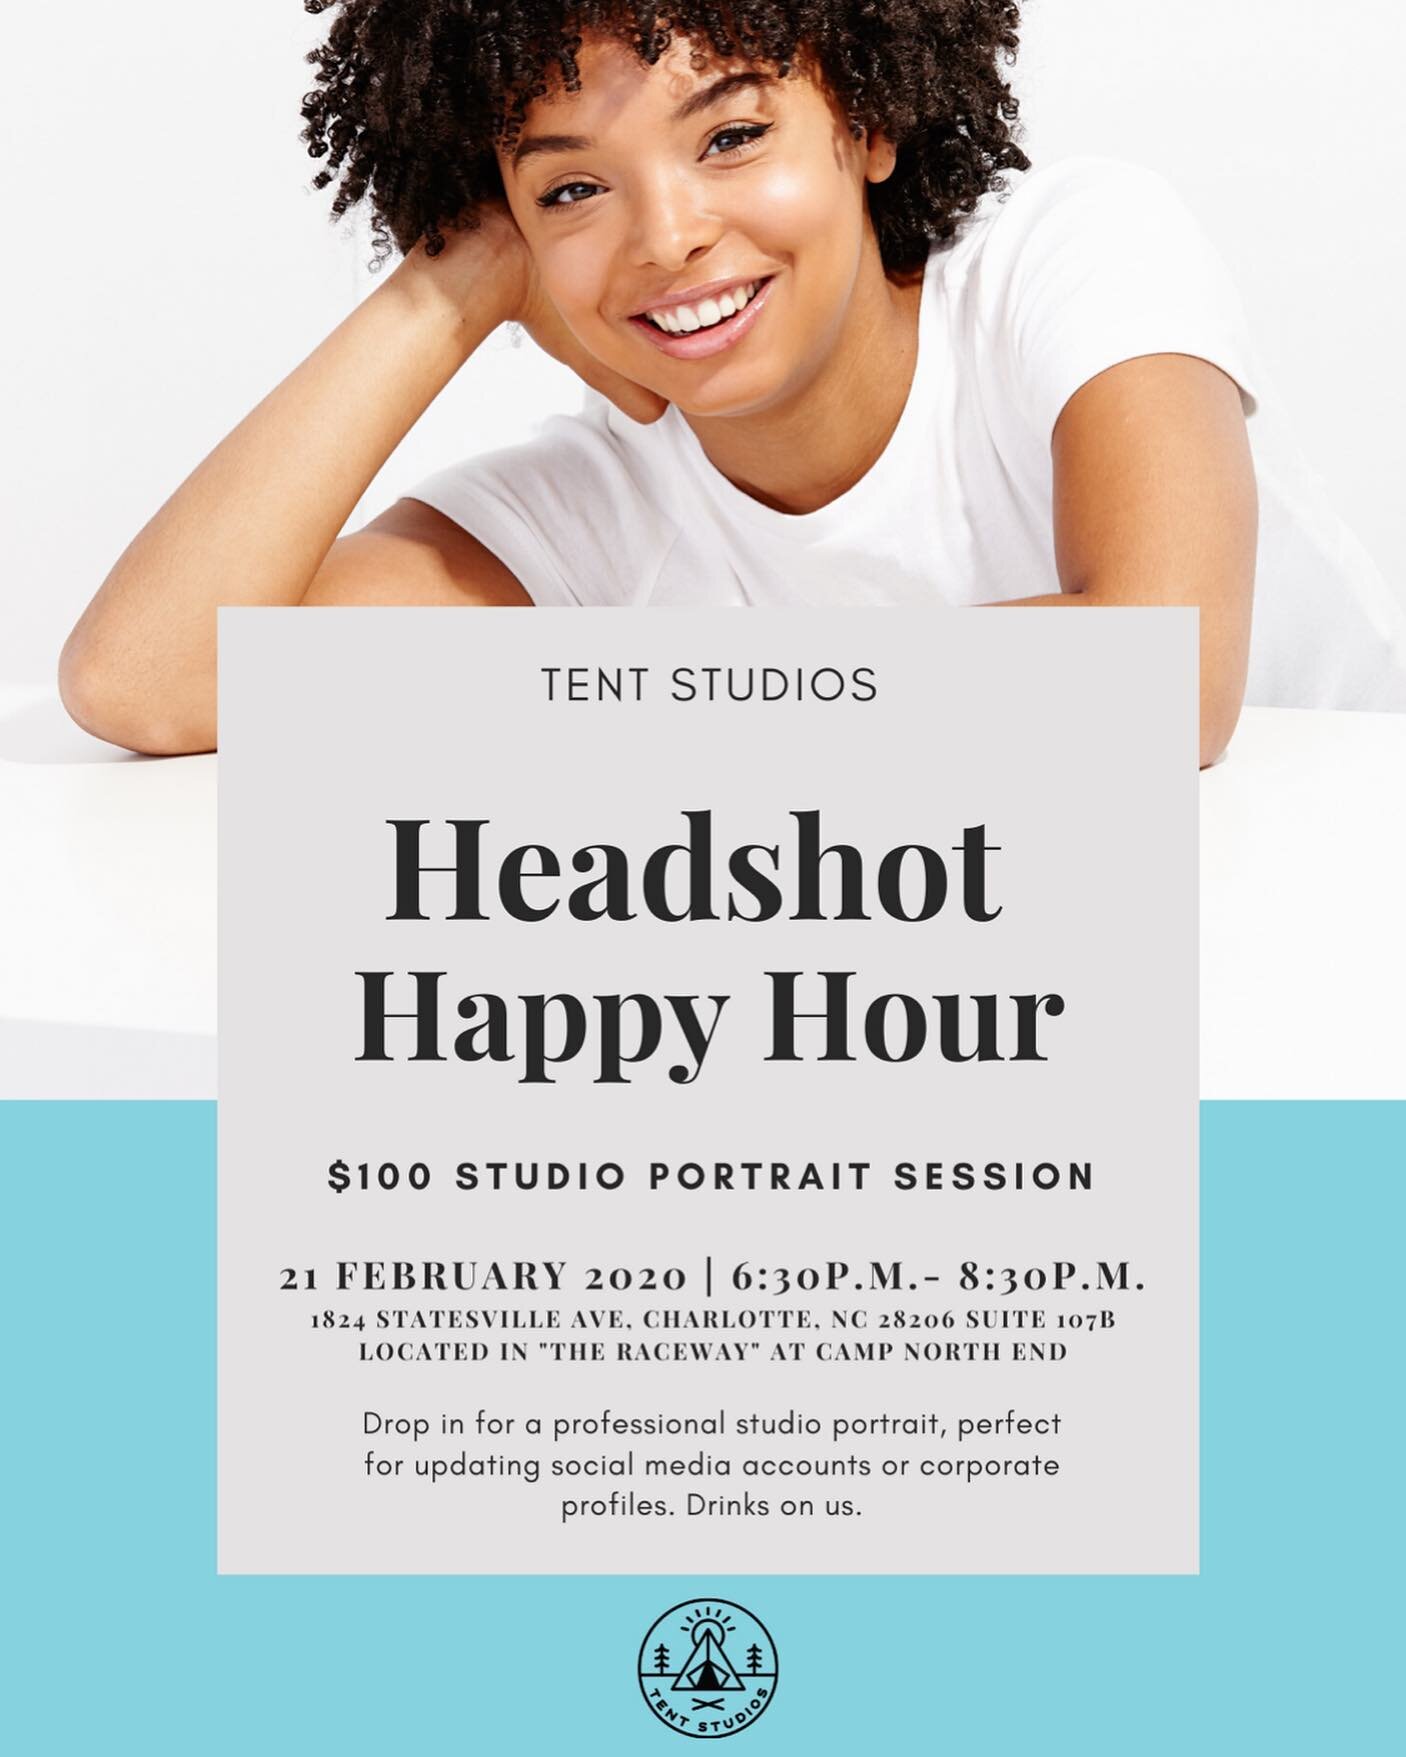 Friday! Come and join us! Drop in for a professional studio portrait ($100), perfect for updating social media accounts or corporate profiles. Drinks on us!!
Come find us at CampNorthend in the Raceway Building // @campnorthend